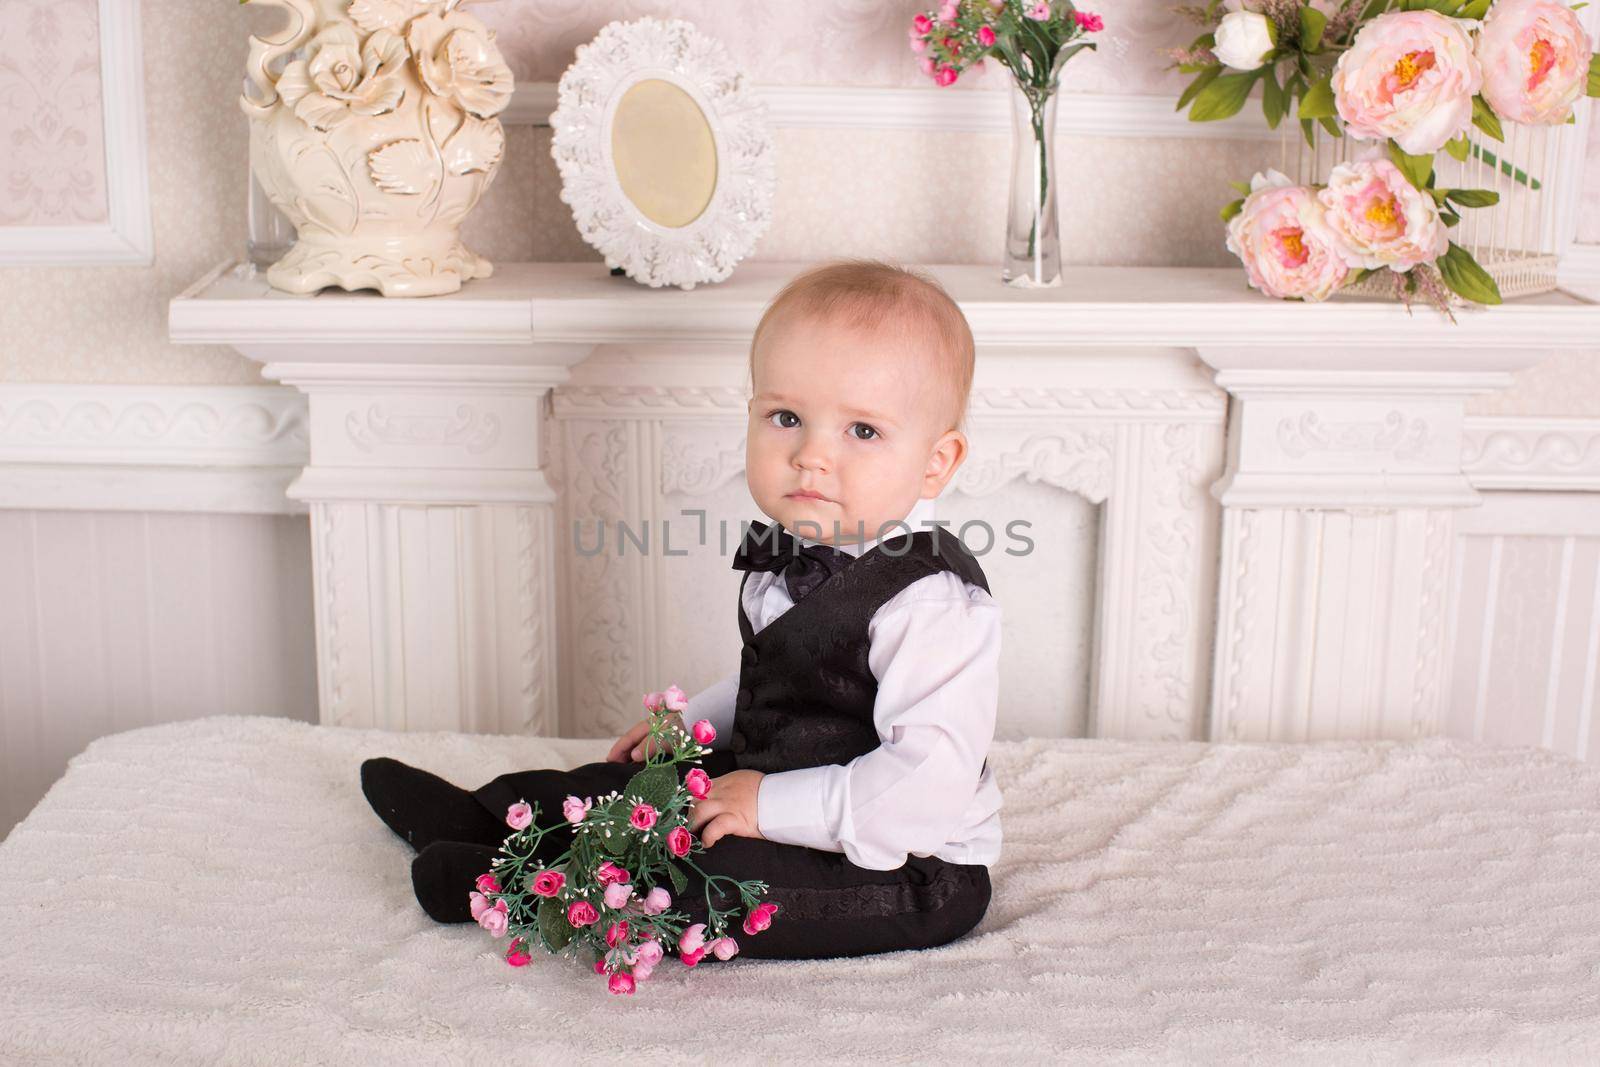 Child in a tuxedo sitting on the bed next to the fireplace with flowers in their hands.